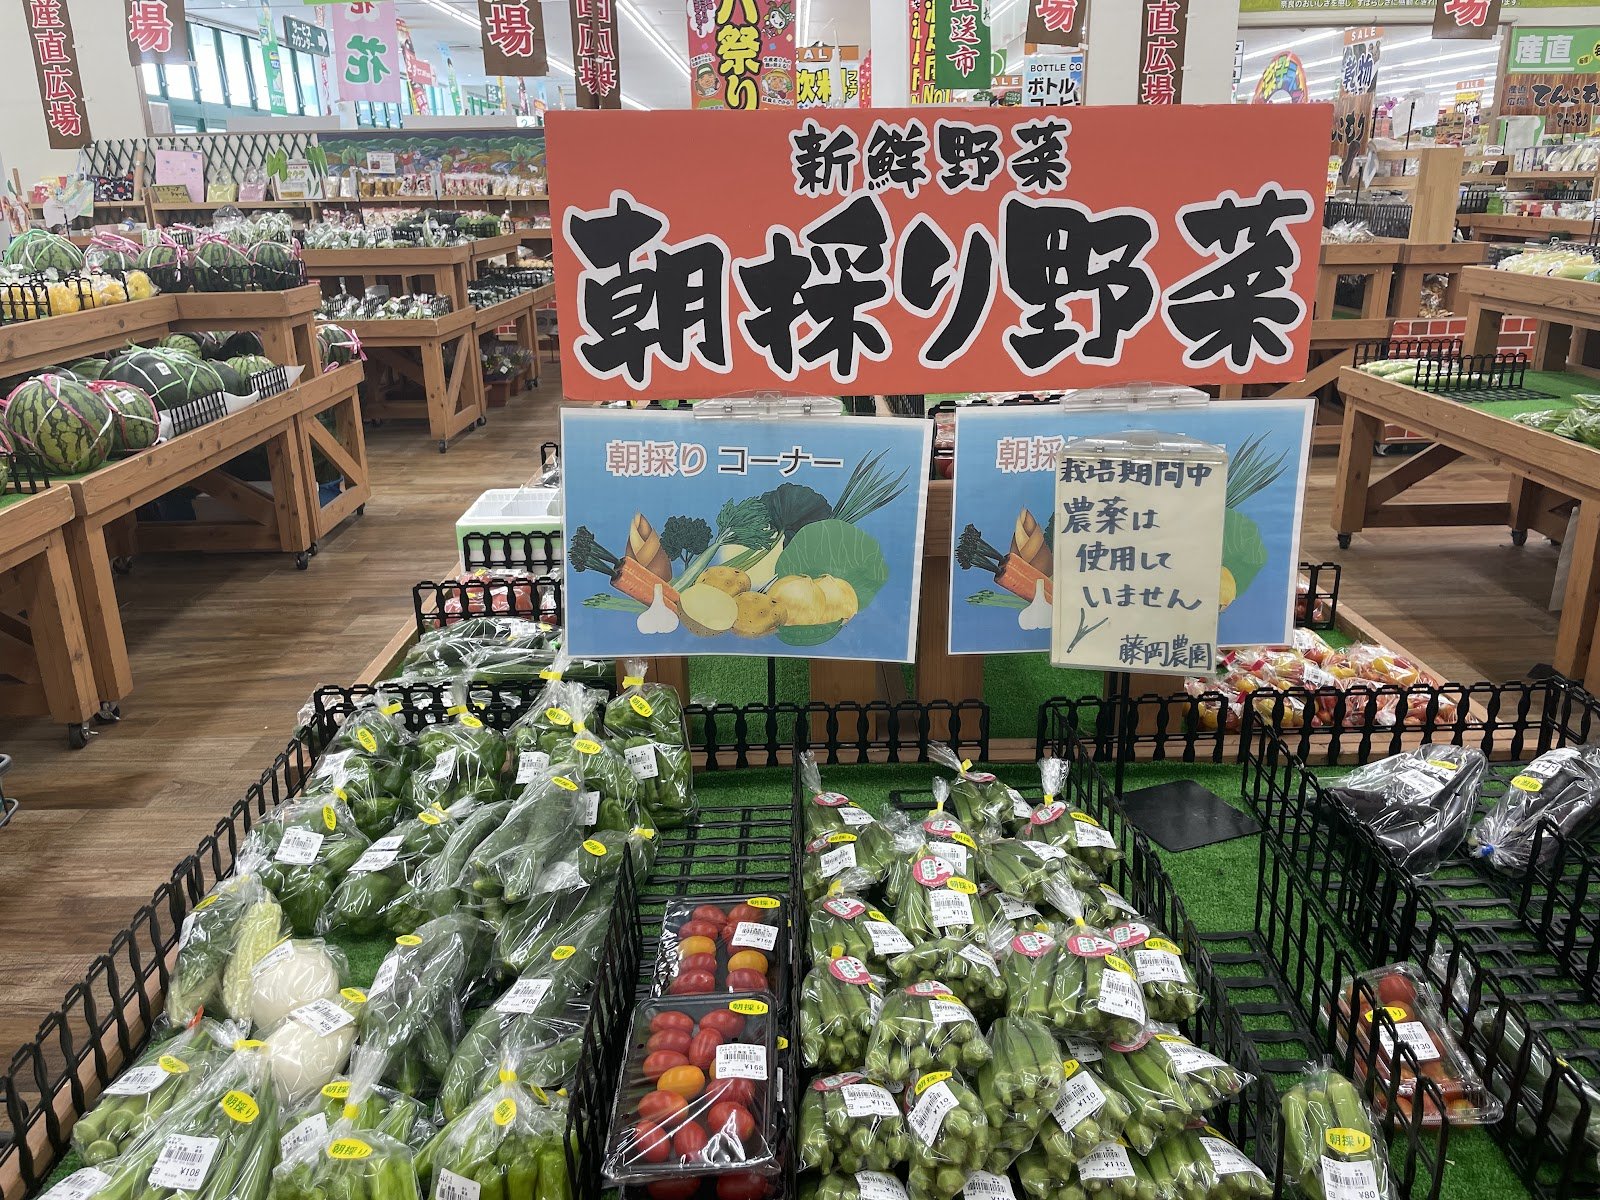 Supermarkets have sections for vegetables locally harvested                          that morning, labeled with the farmers’ names.